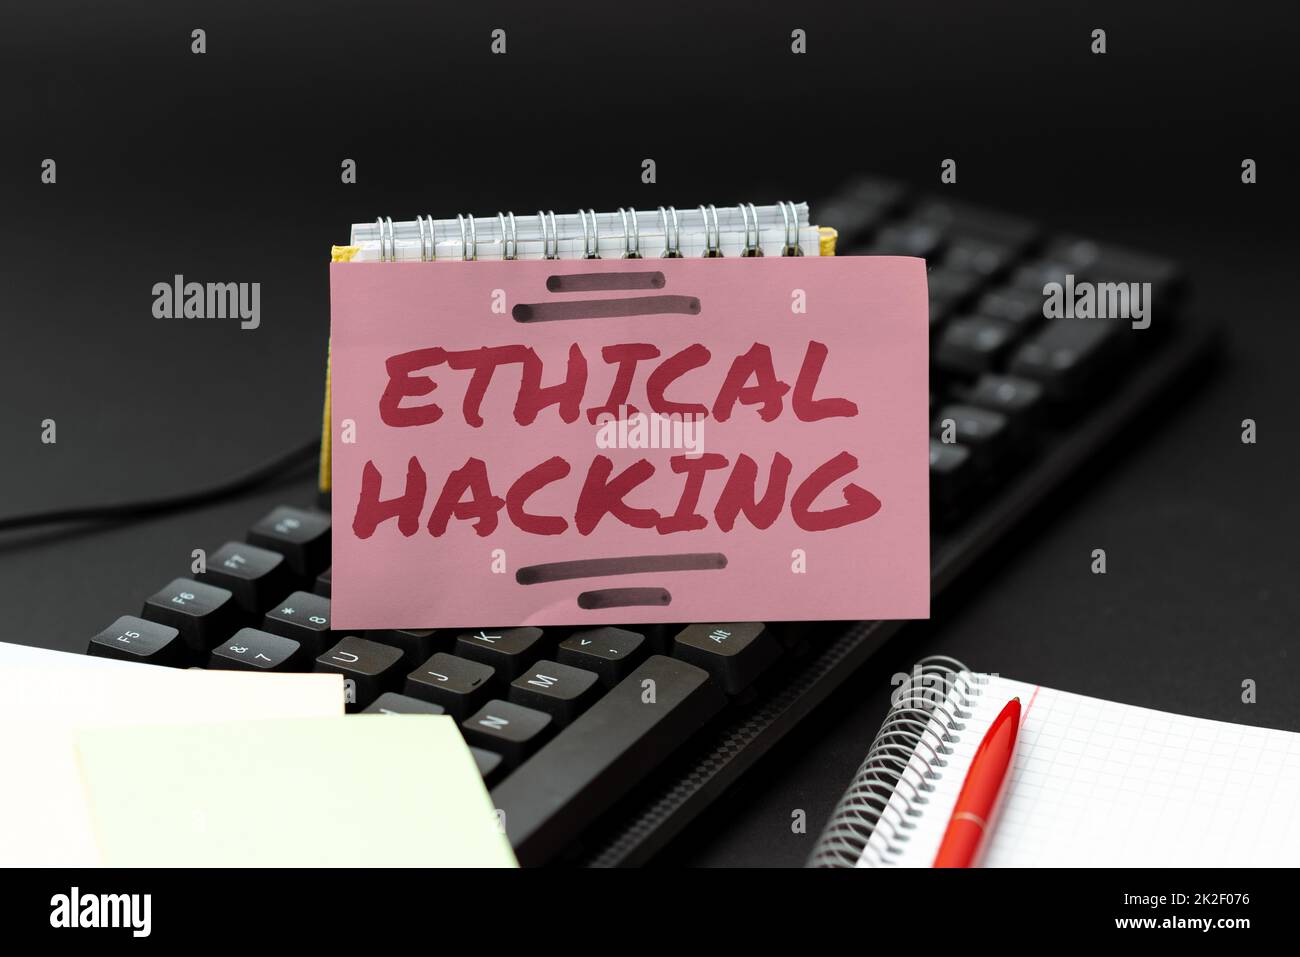 Ethical Hacking With Net